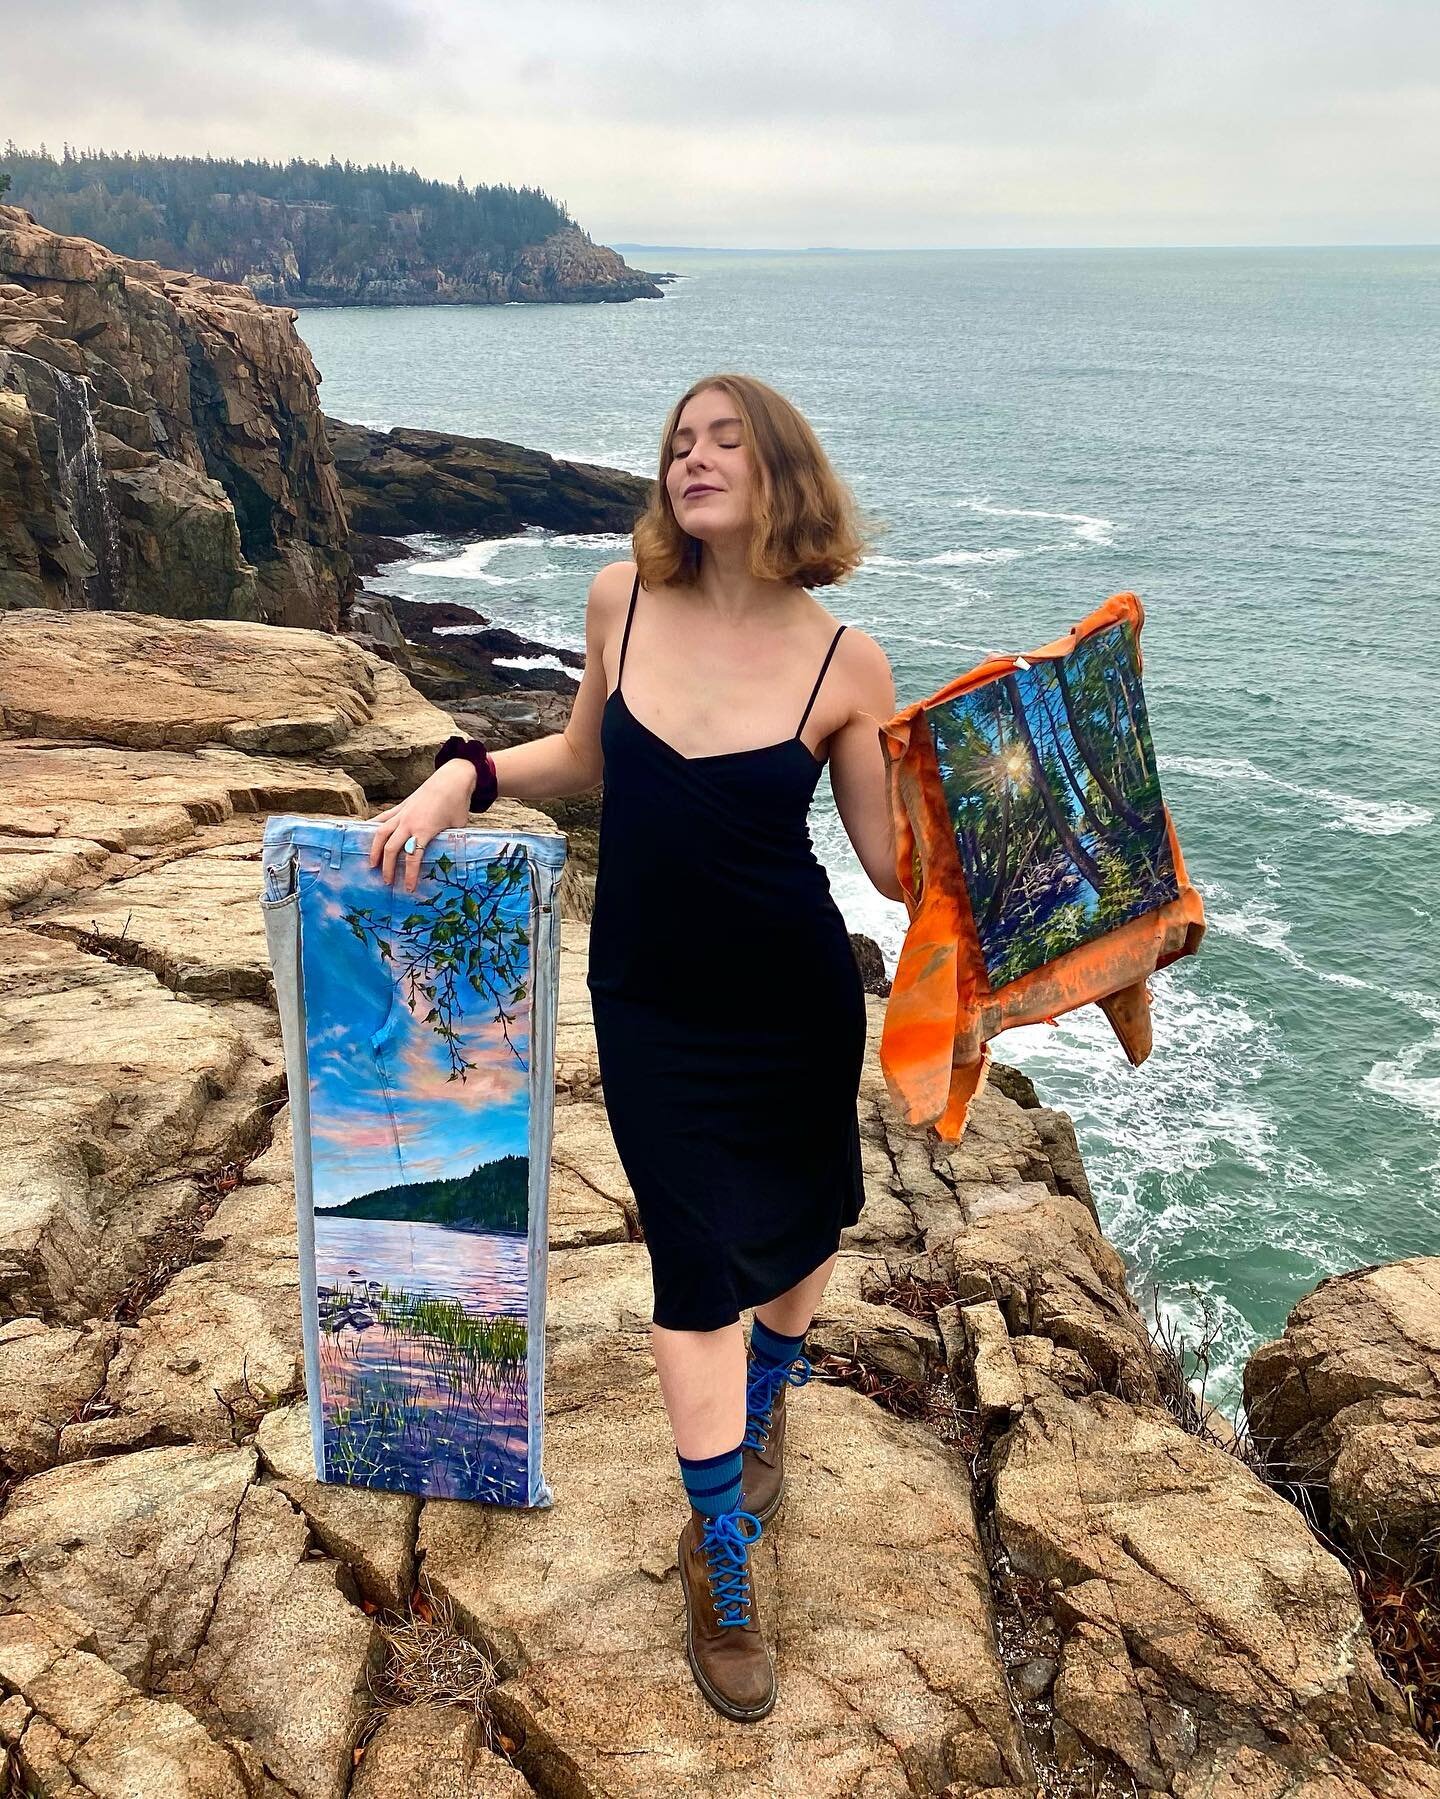 Wanna buy my exes pants WHILE supporting a local Maine food security nonprofit @opentablemdi ??? It&rsquo;s an @oliviarodrigo summer so I know the answer is yes.

In order to support the growing coastal Maine community Open Table MDI provides free n 